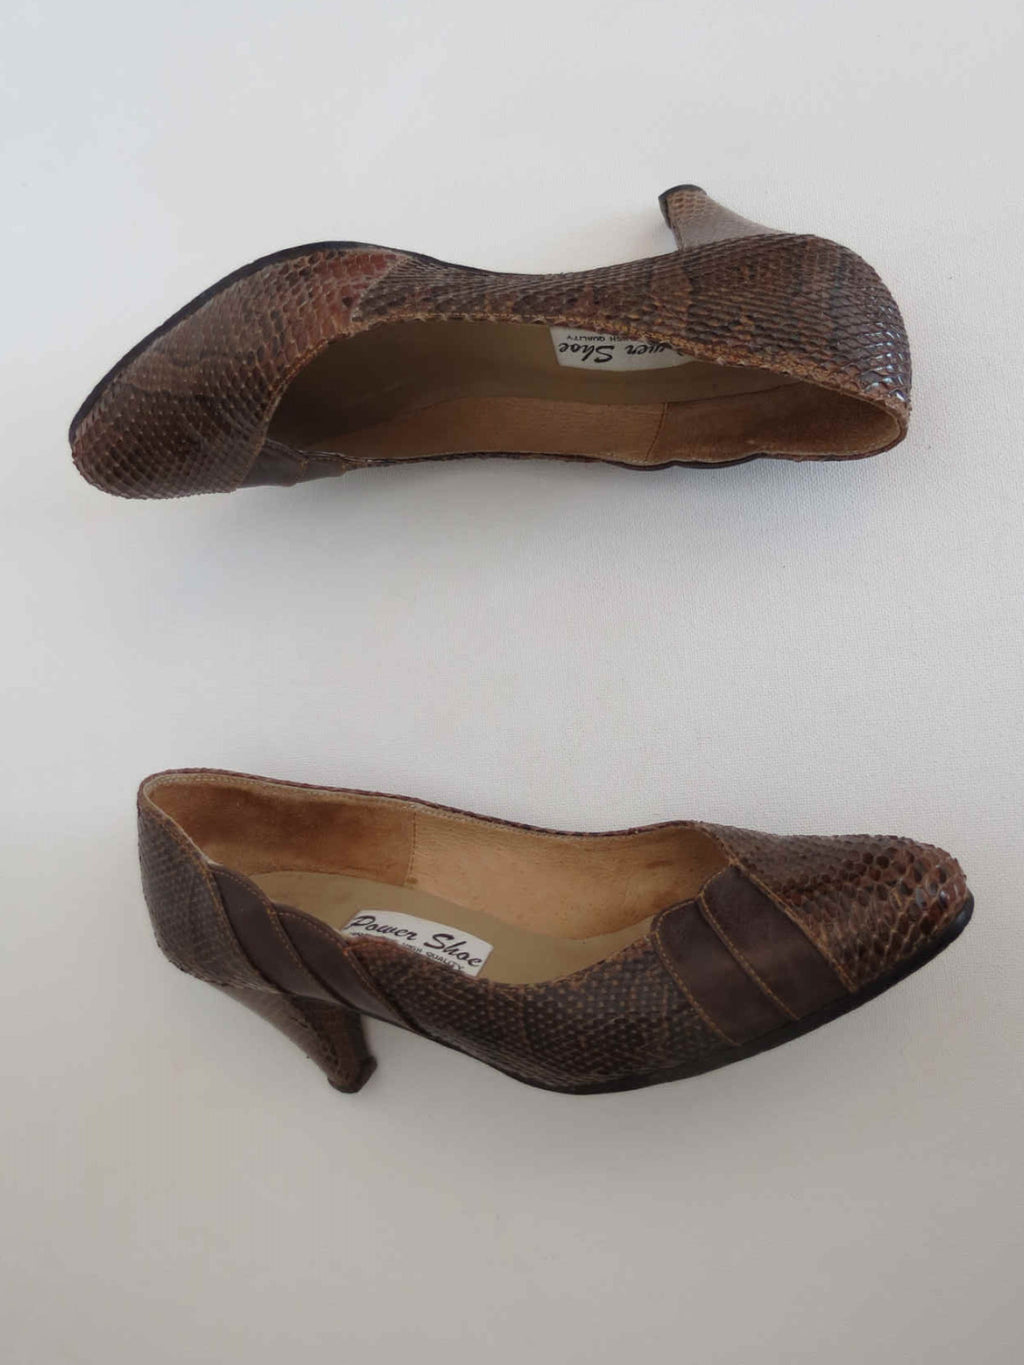 vintage 1950s brown snakeskin shoes heels by power shoe size 6